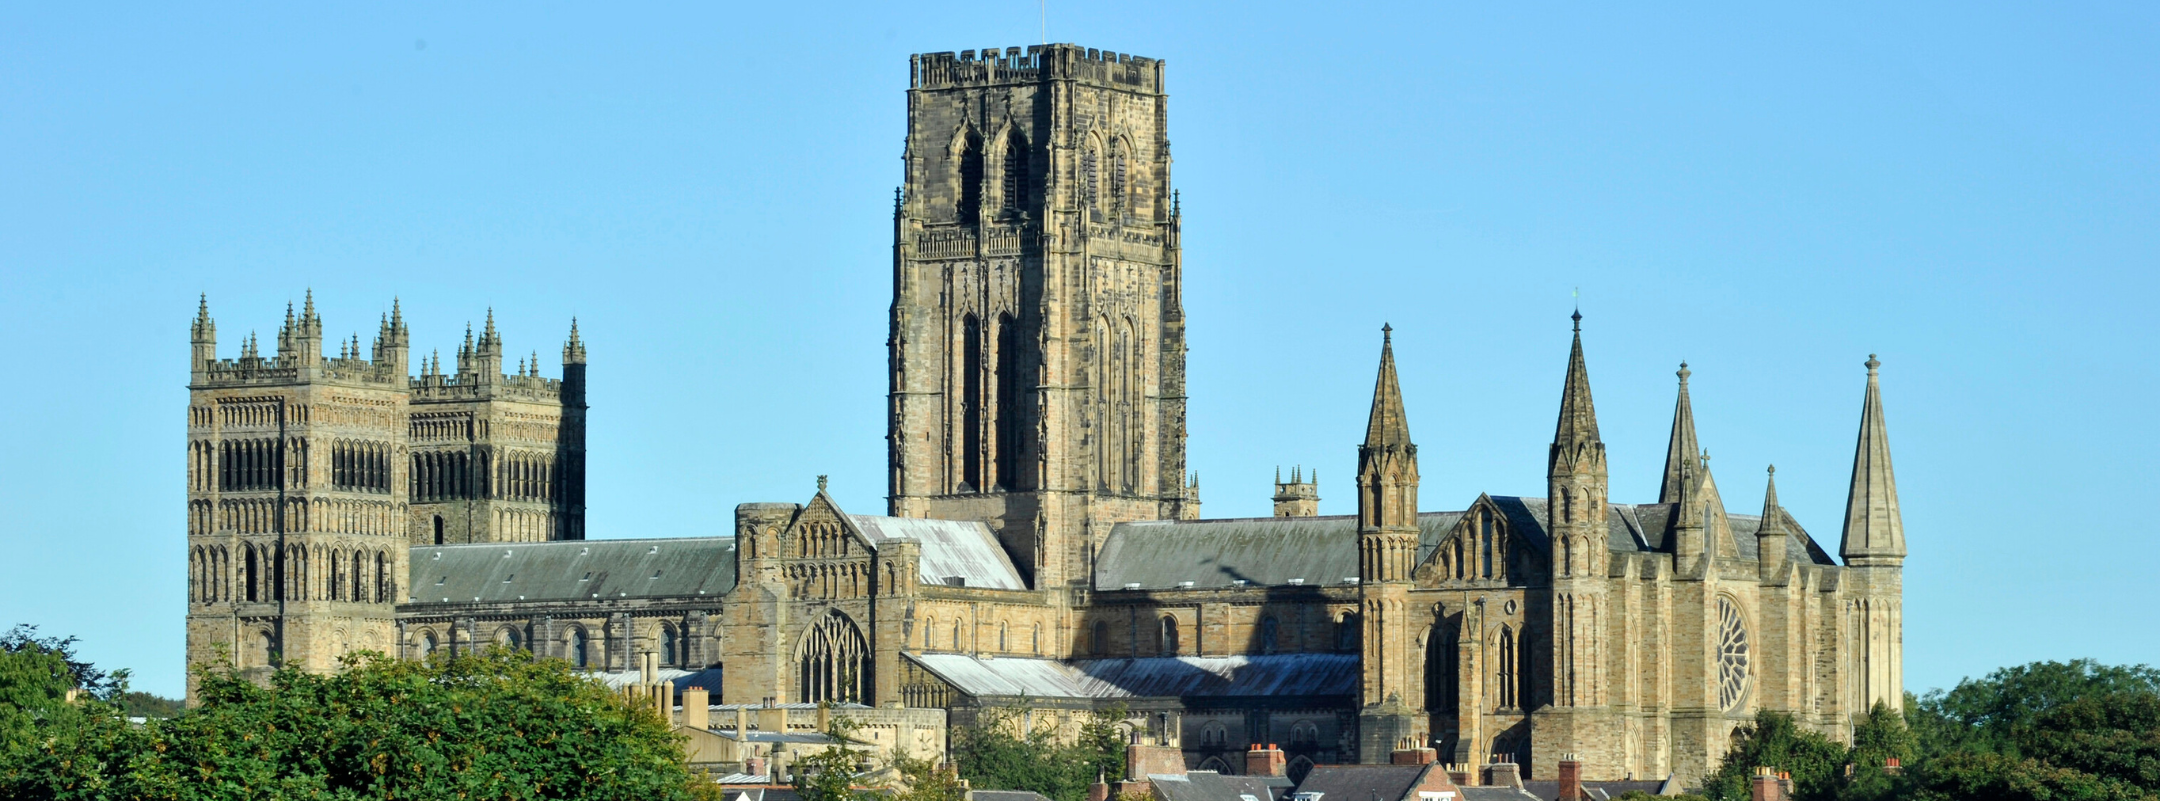 Beautiful Durham skyline showing the majestic Cathedral